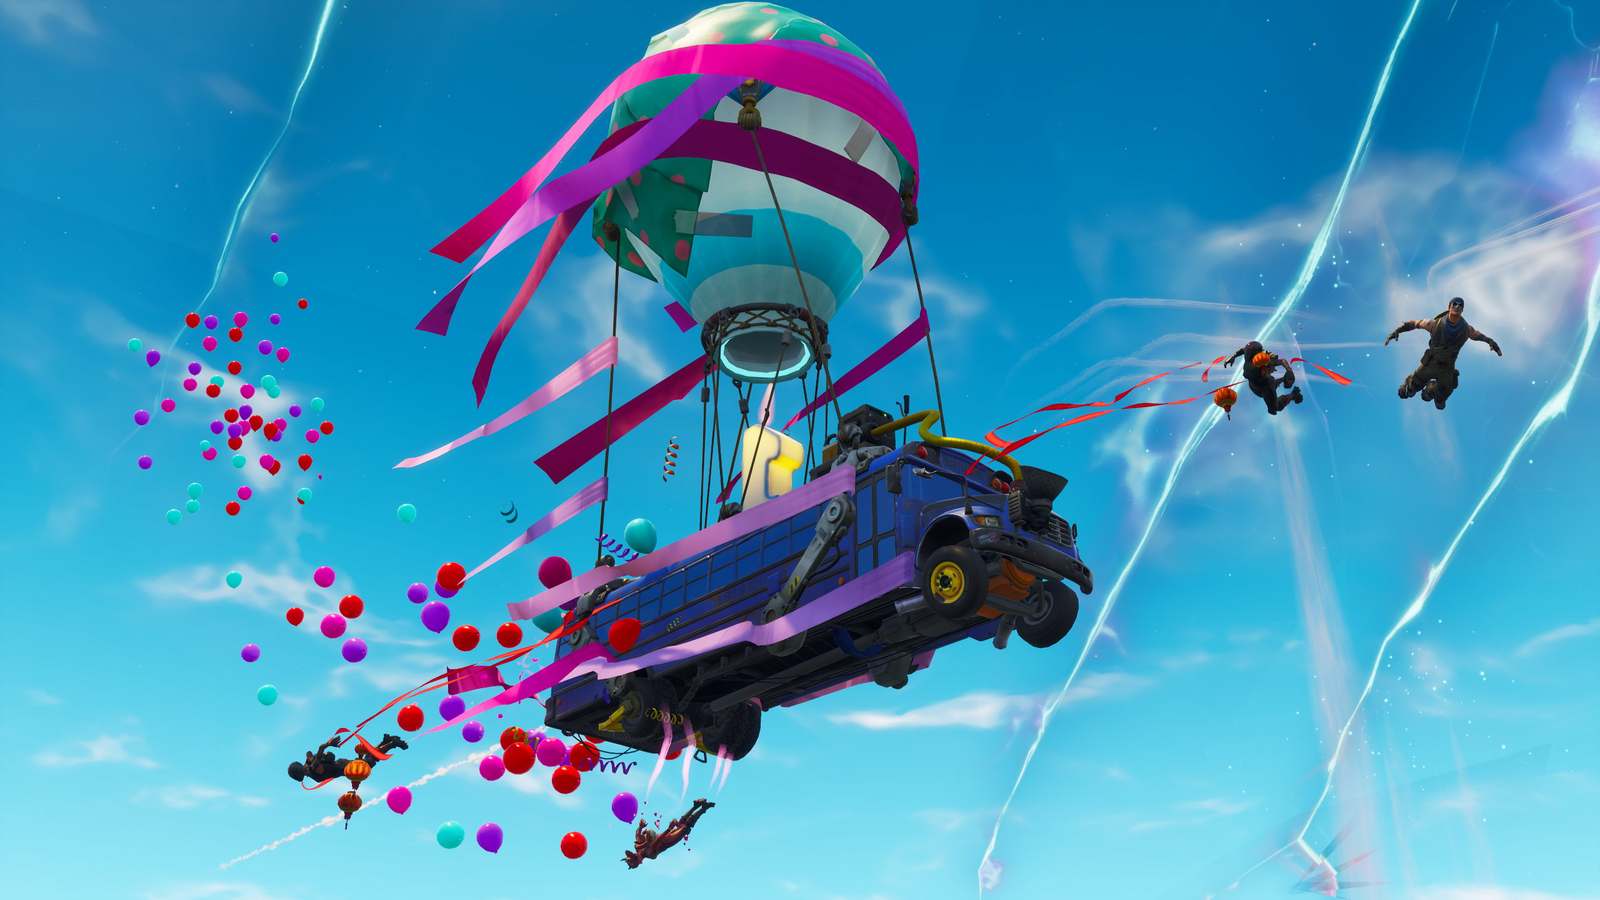 Epic Was Willing to Sue Sony Over Fortnite Crossplay